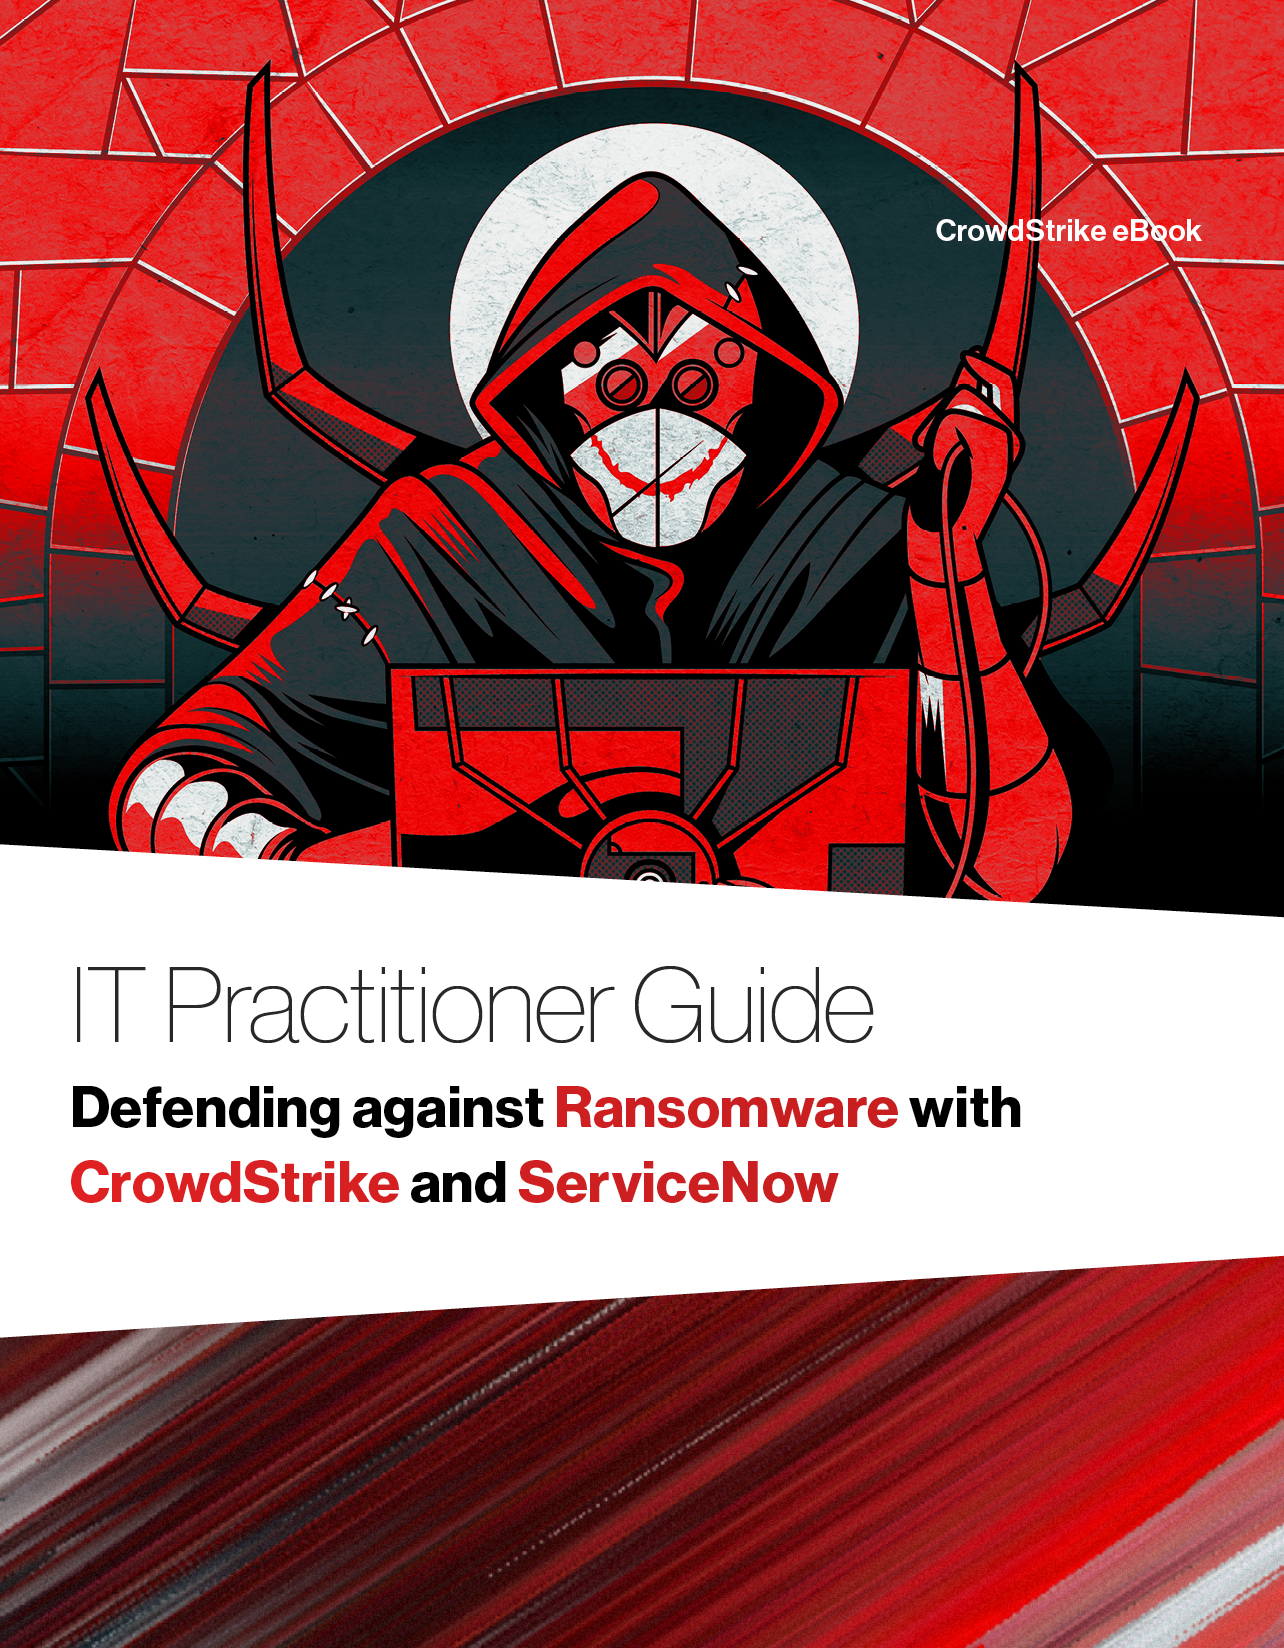 IT Practitioner Guide: Defending Against Ransomware with CrowdStrike and ServiceNow